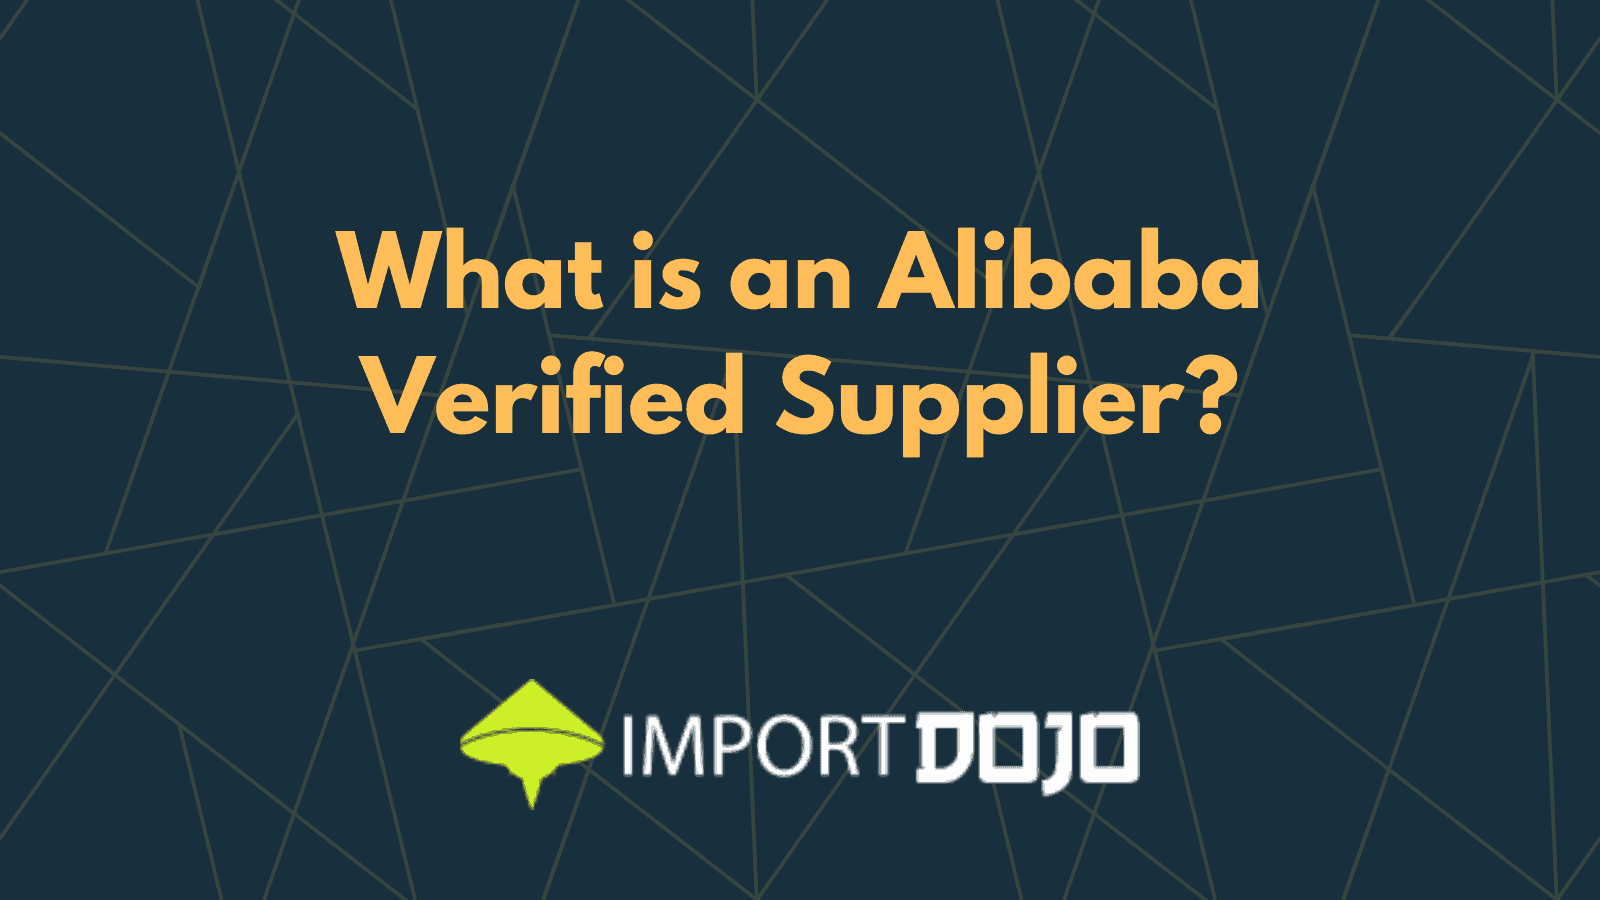 What is an Alibaba Verified Supplier